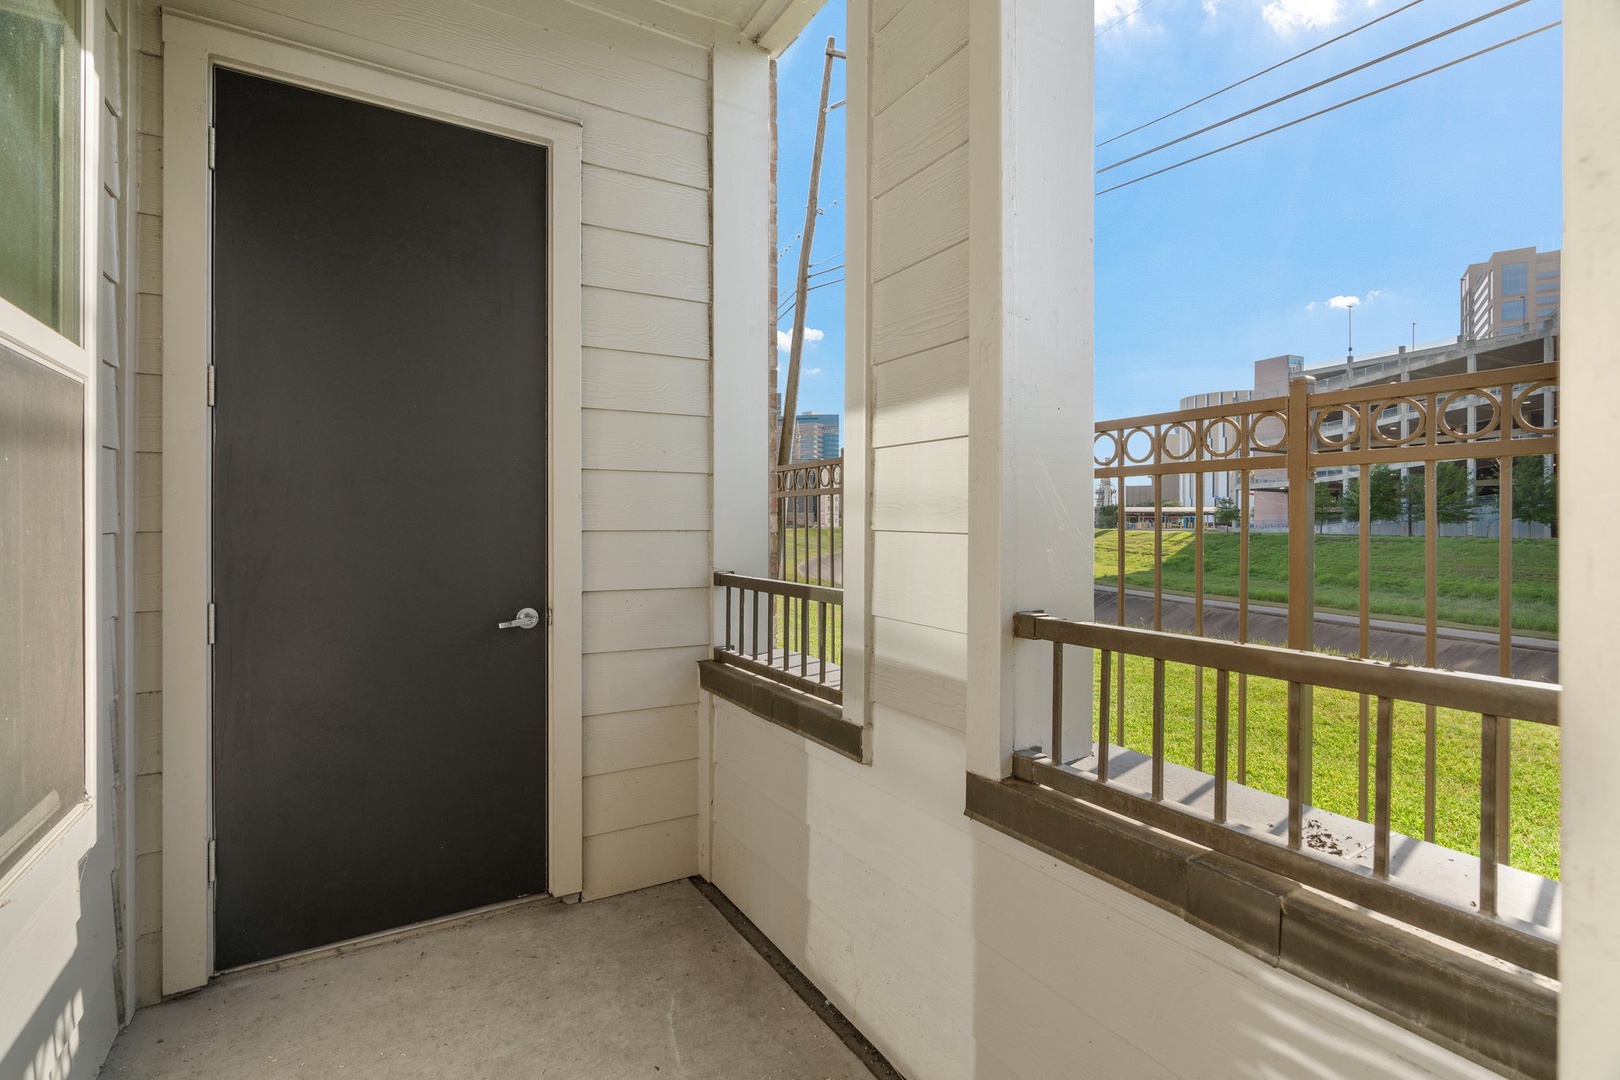 Embrace the Bayou views from your private balcony.